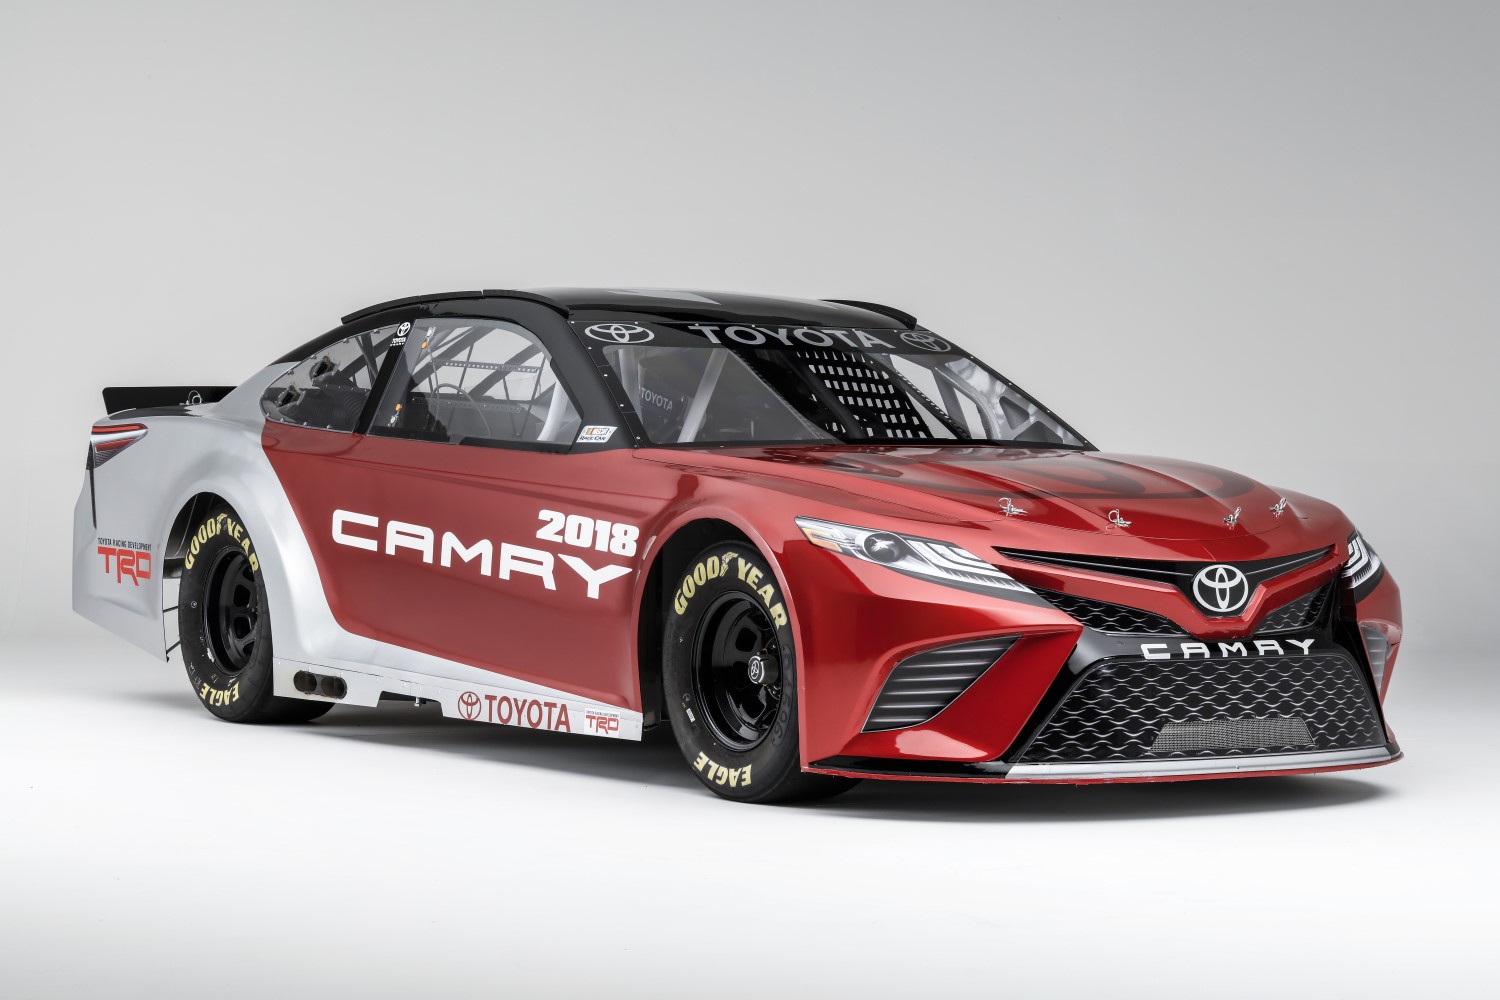 2018 Camry to run in 2017